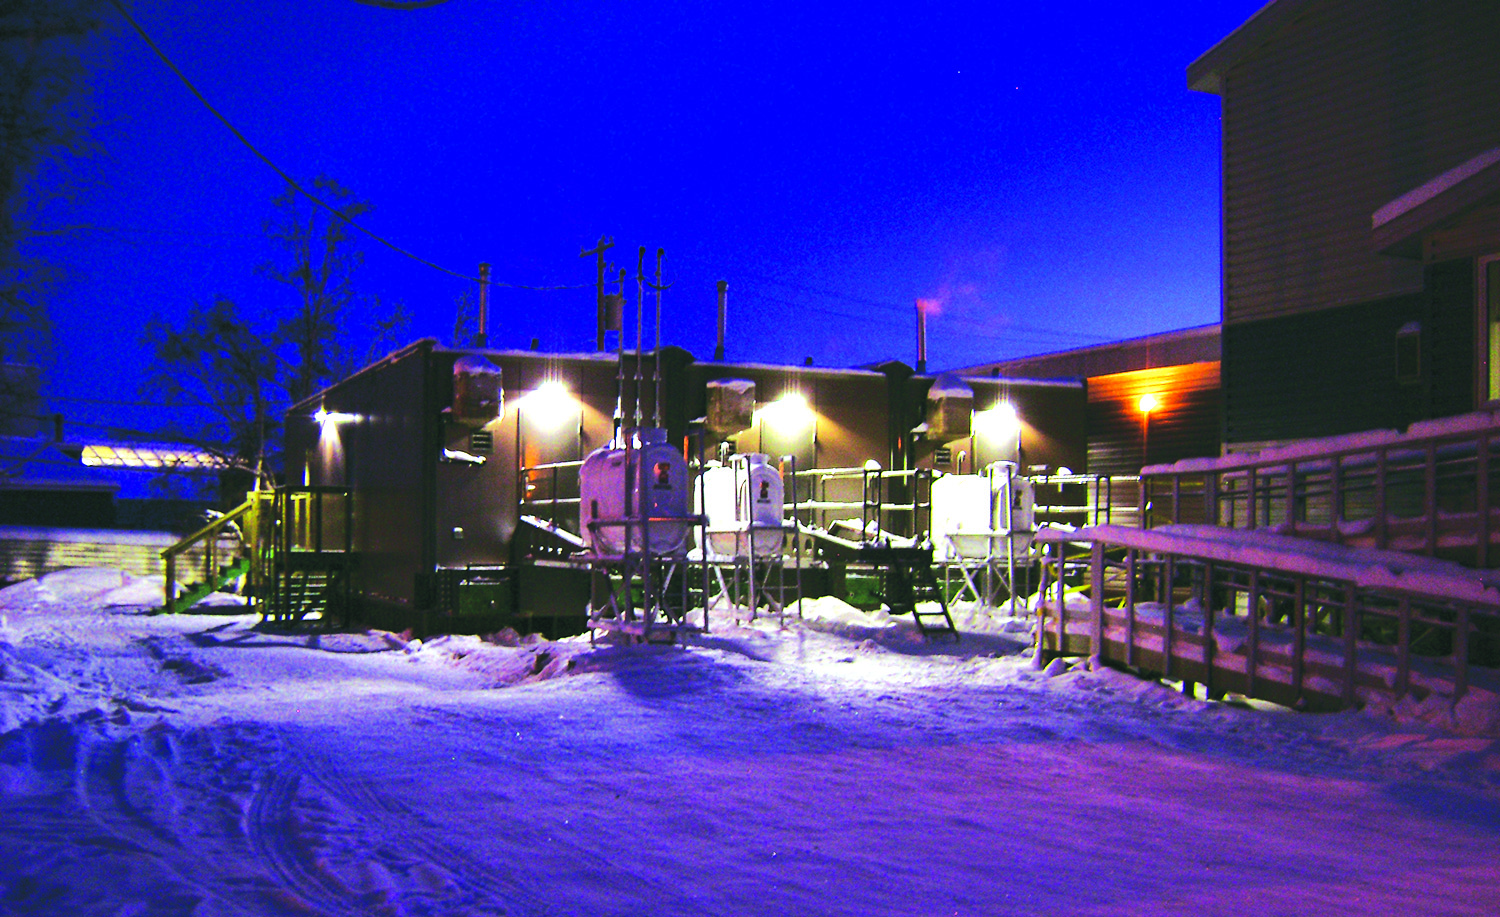 A row of Valid RCMP Holding cell trailers lit up at night in the winter.